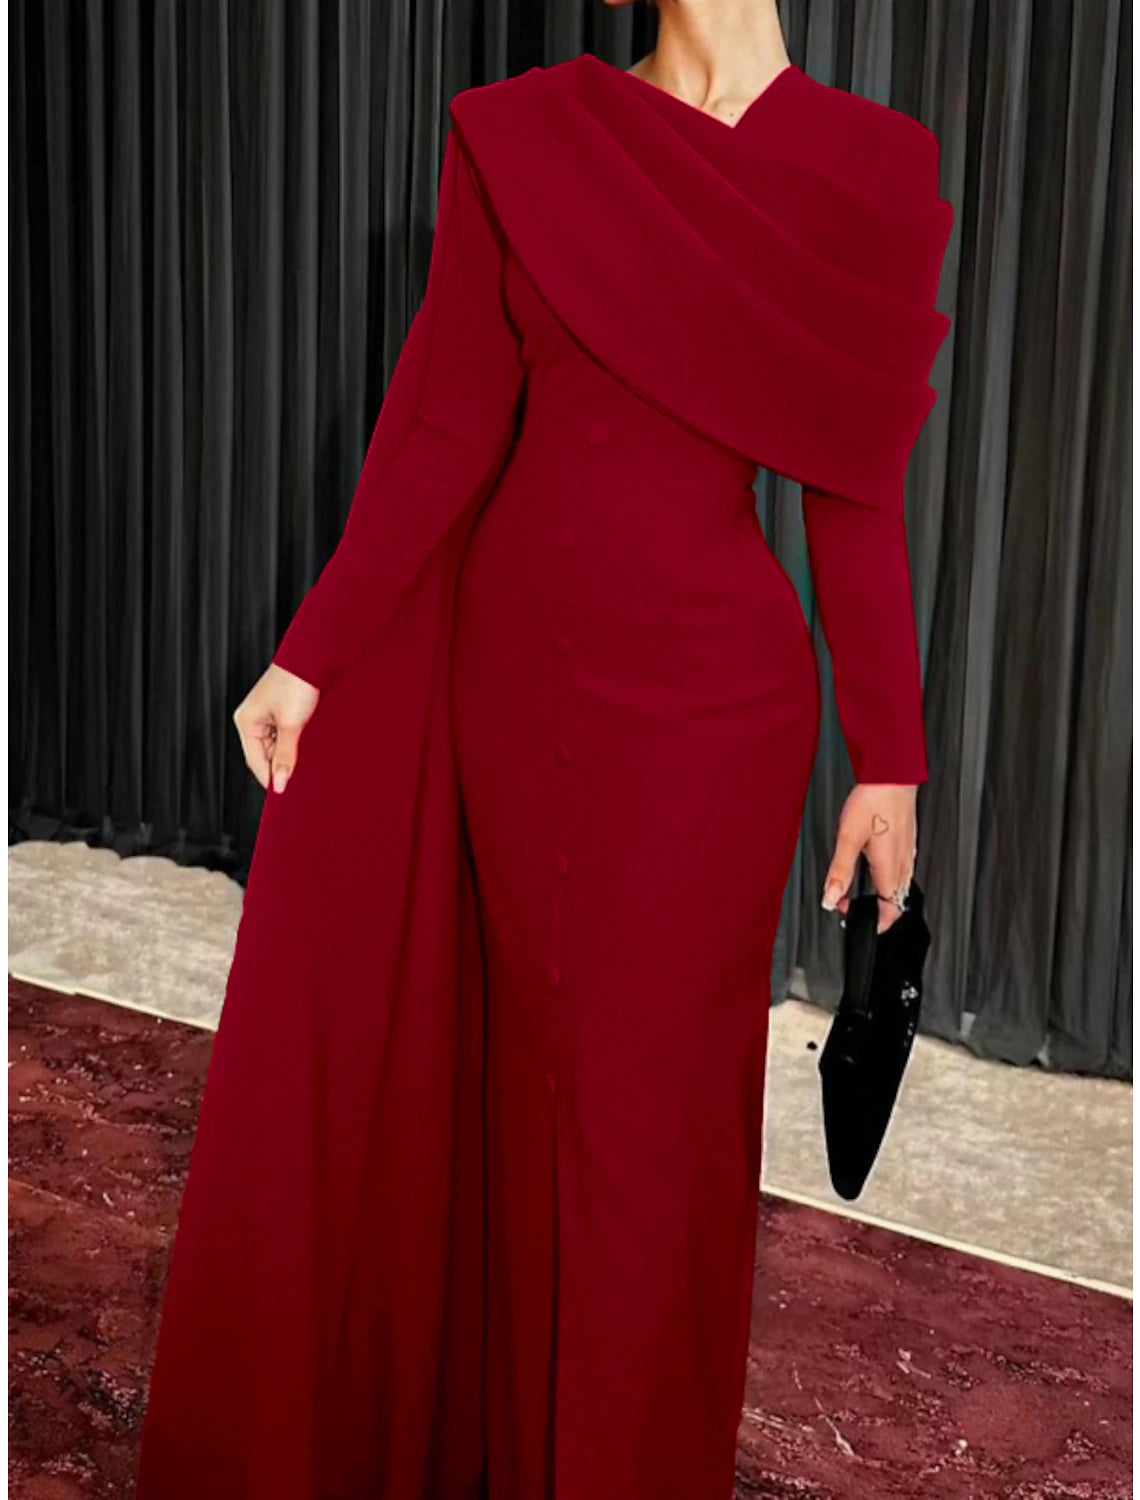 Sheath Red Black Red Green Dress Evening Gown Elegant Cape Dress Formal Fall Sweep / Brush Train Long Sleeve Cowl Neck Stretch Fabric with Buttons Slit